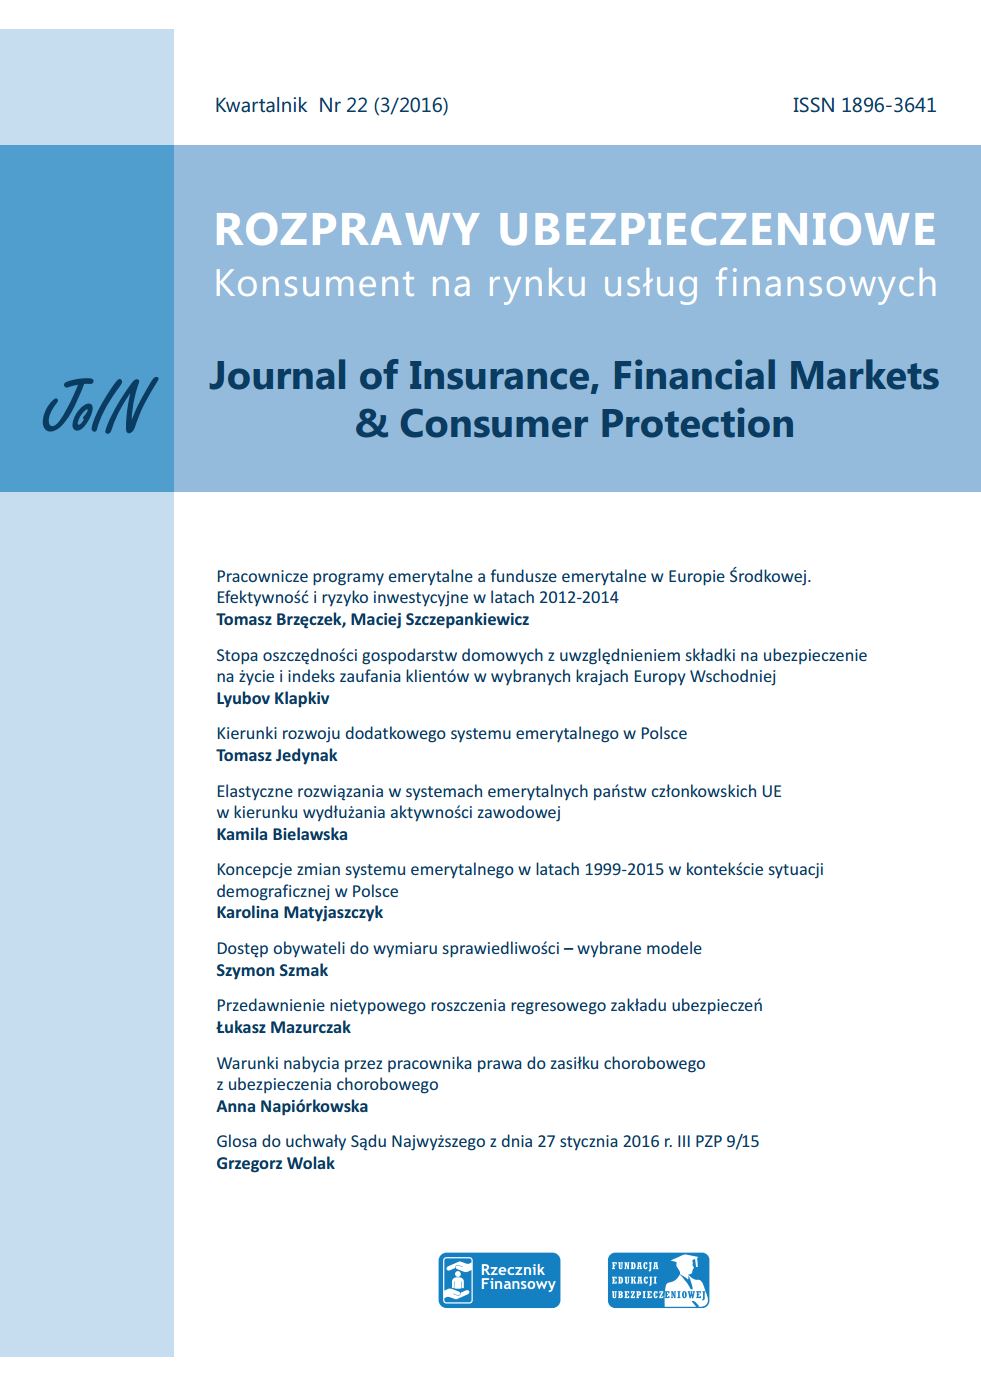 Concepts of Pension system changes in the years 1999-2015 in the framework of demographic situation in Poland Cover Image